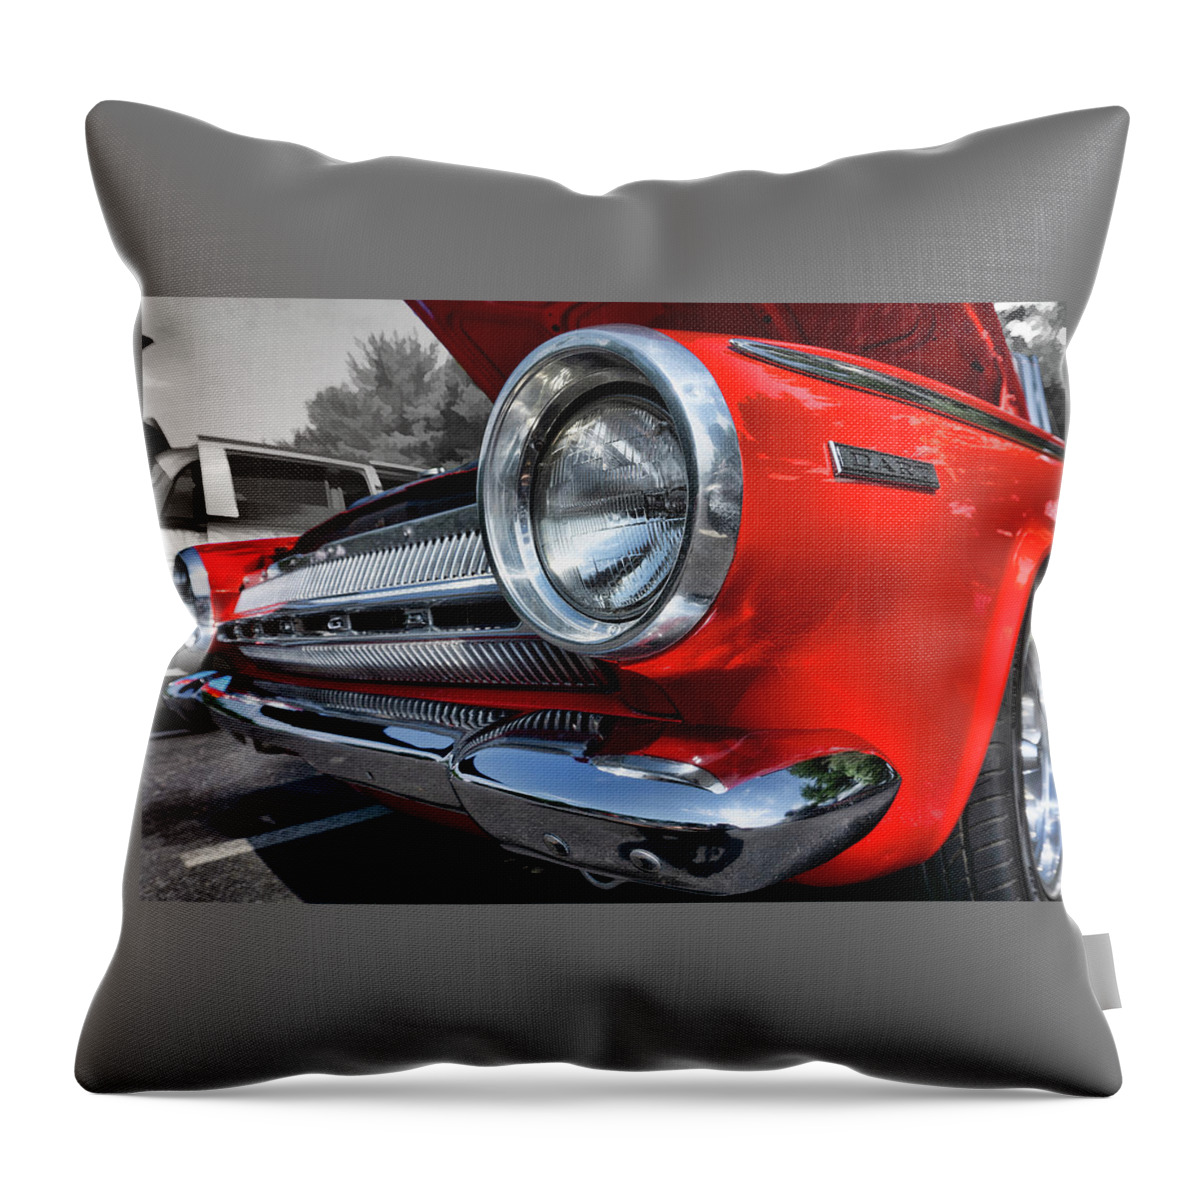 Dodge Throw Pillow featuring the photograph 1964 Dodge Dart front by Daniel Adams